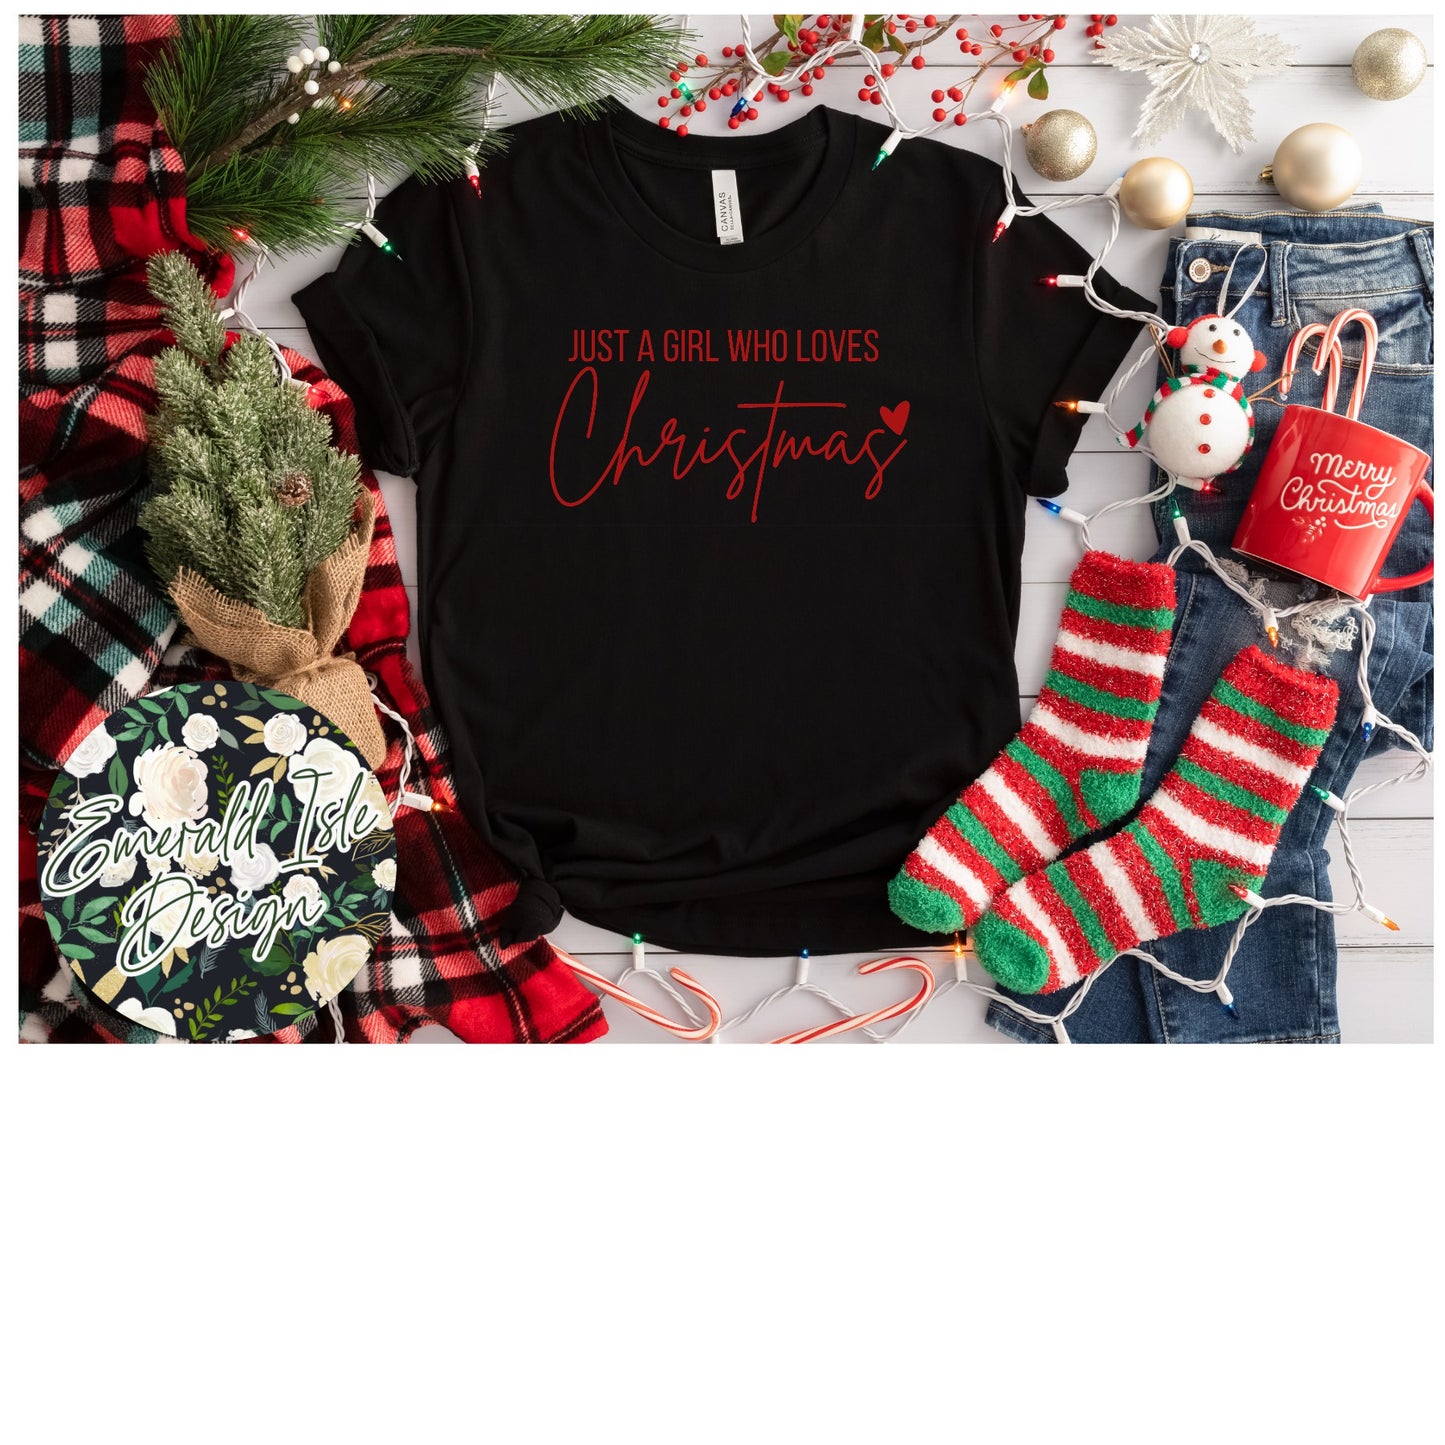 SALE** Just a Girl Who Loves Christmas Design